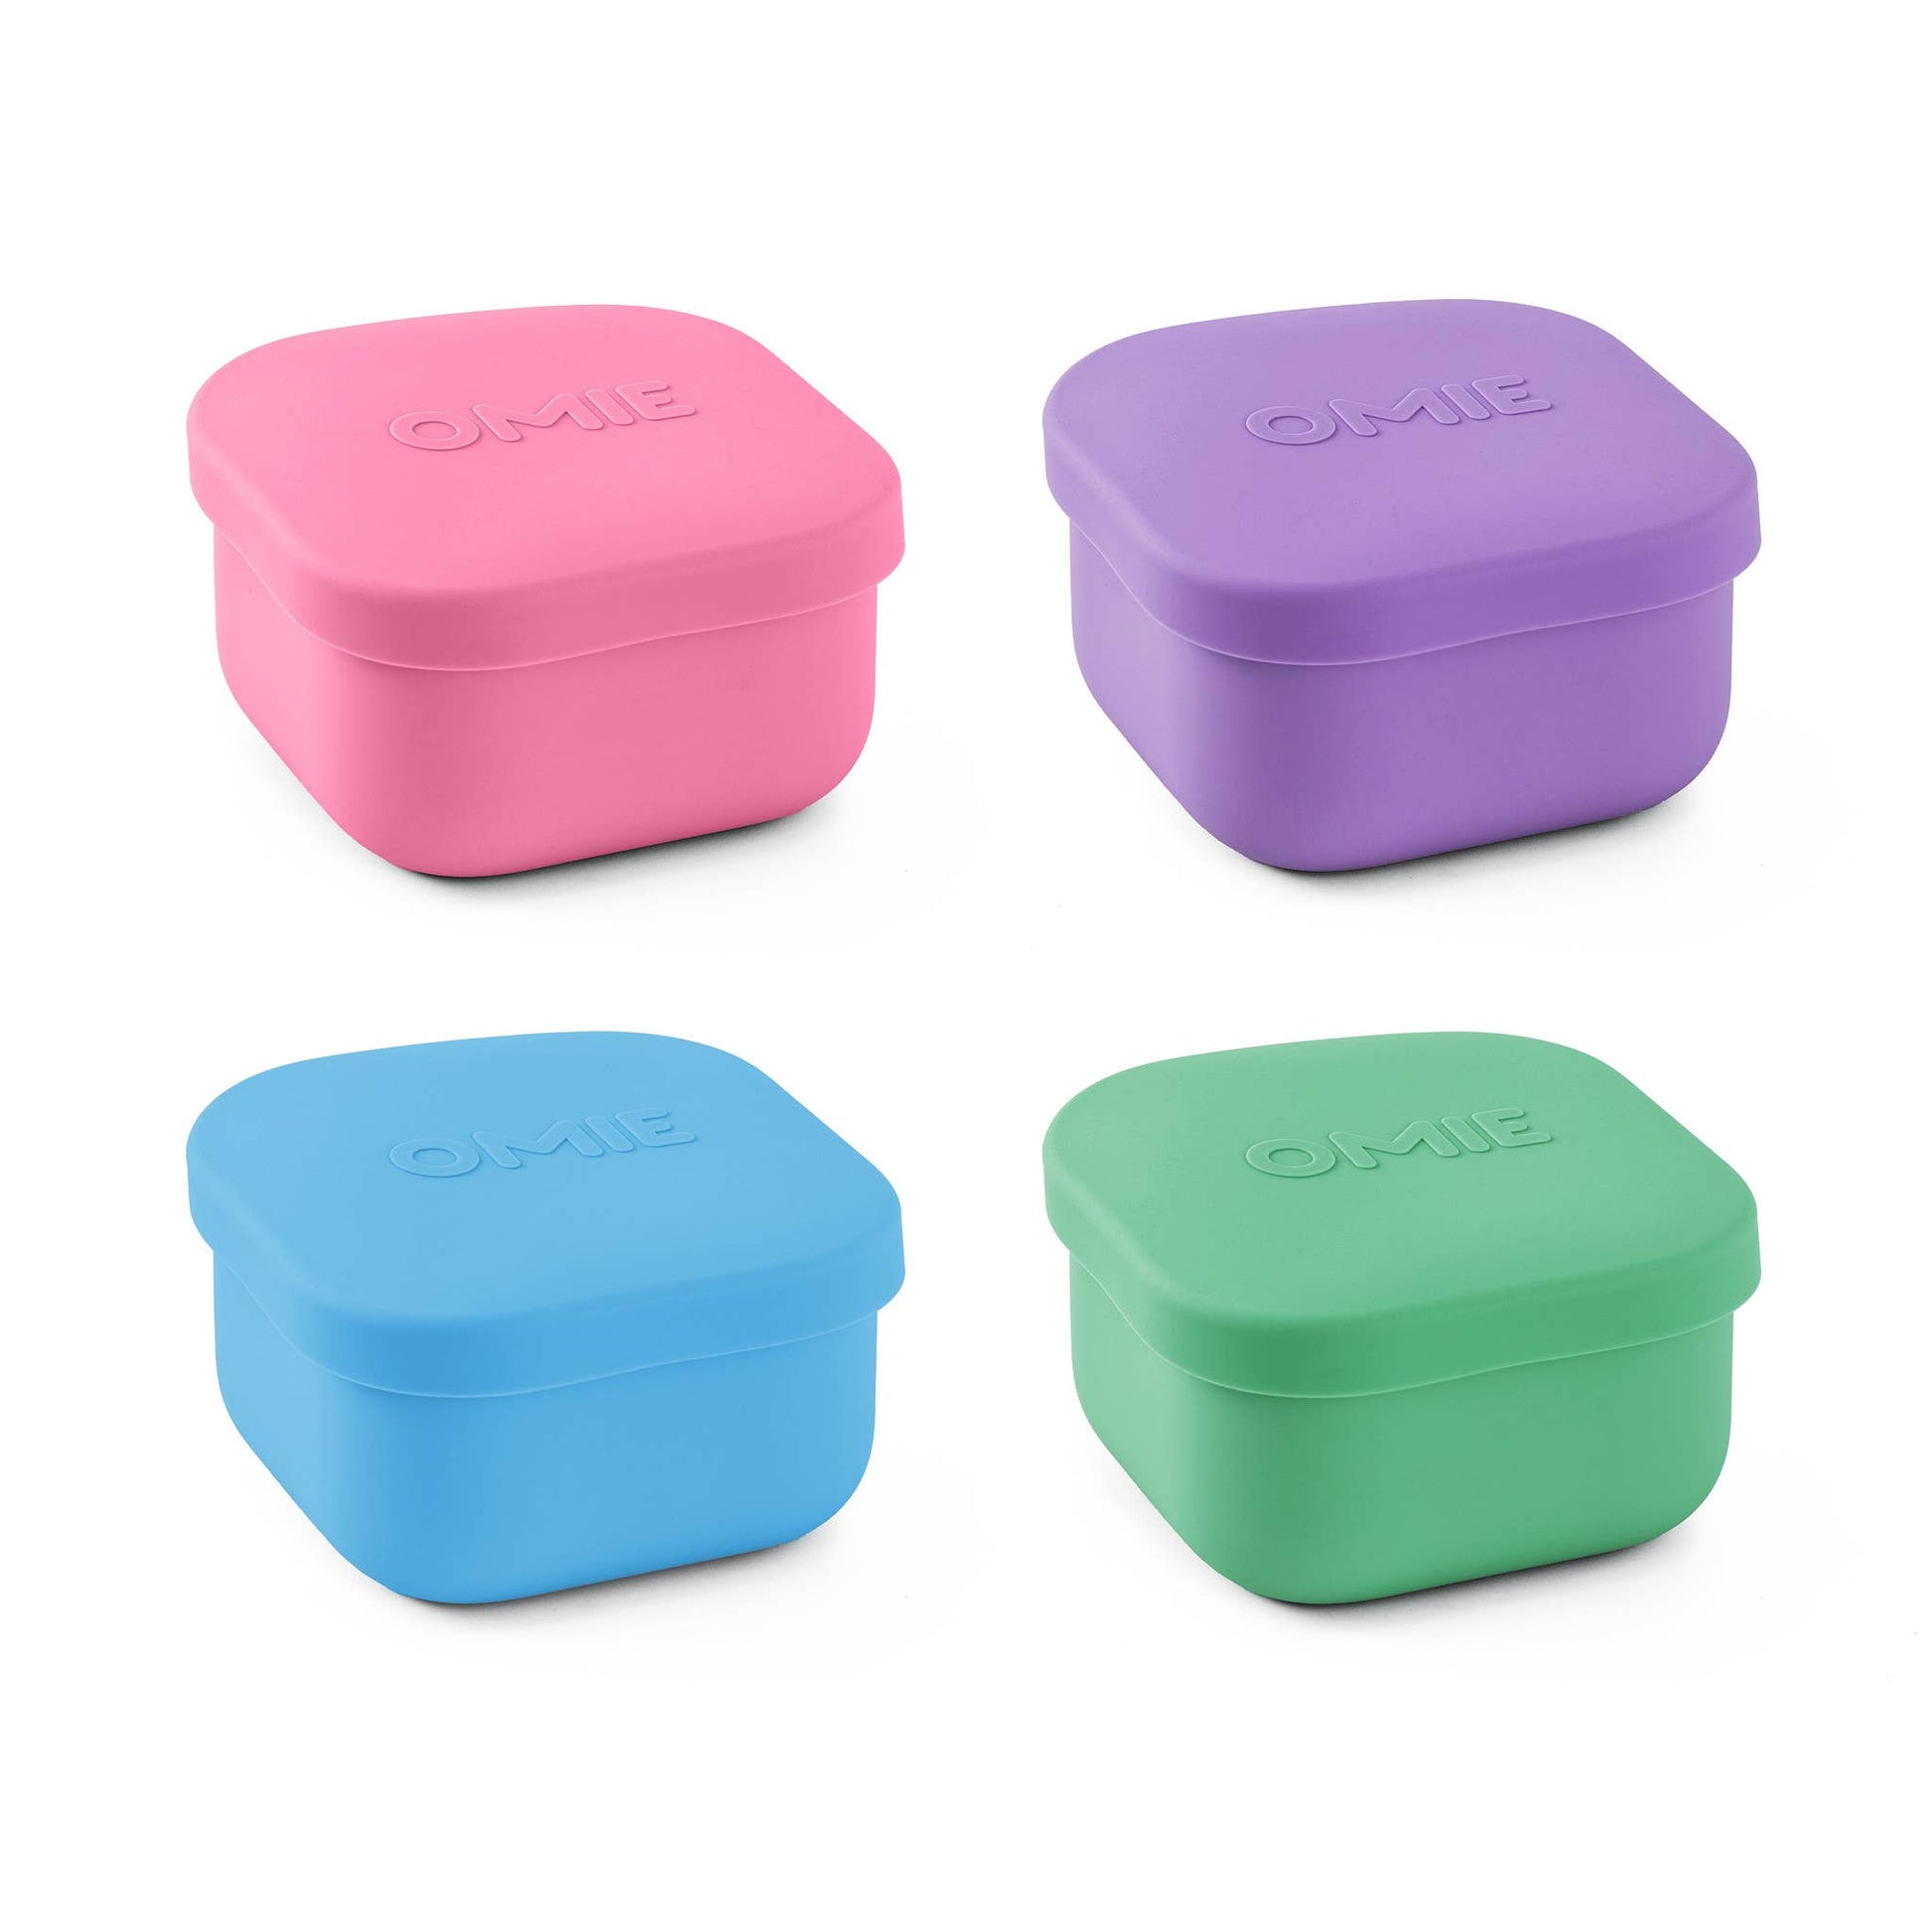 OmieSnacks are the cutest matching snack containers for OmieBox